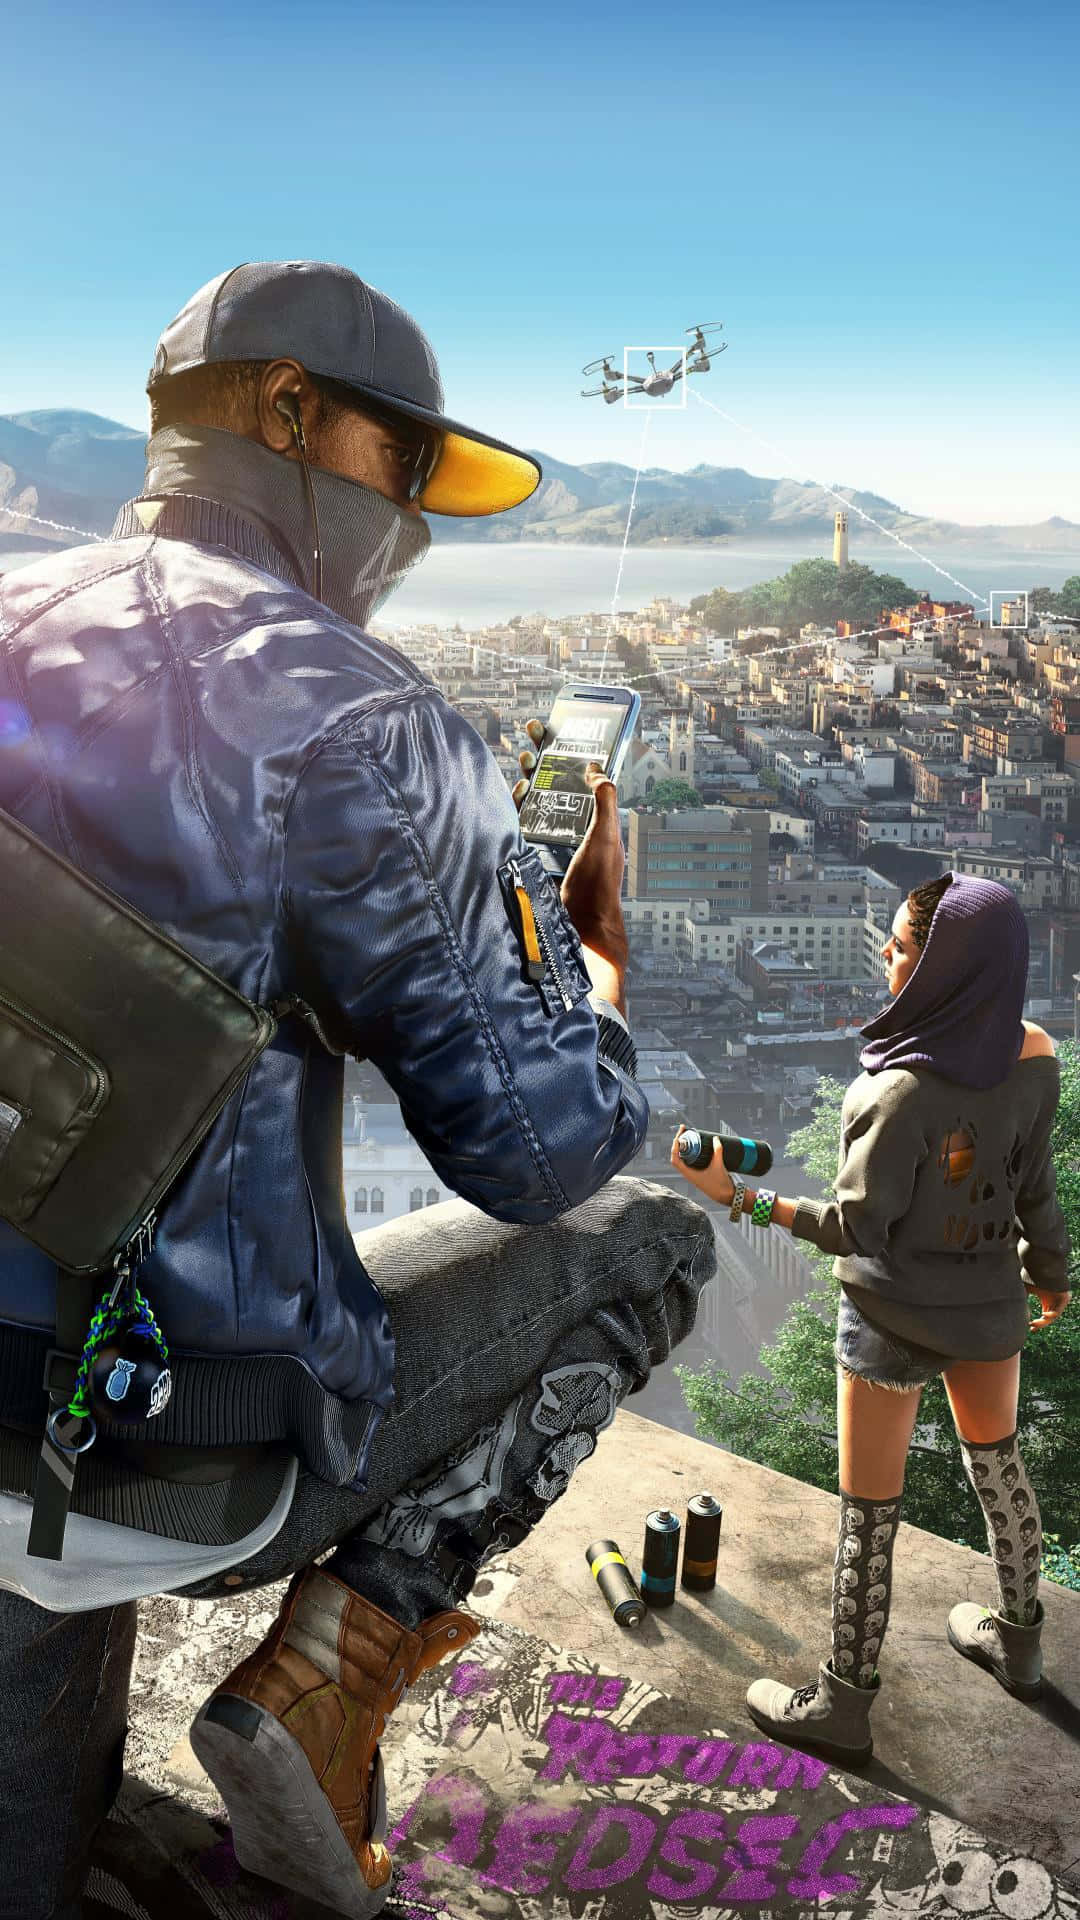 "Hack Your Reality - Play Watch Dogs on Your iPhone" Wallpaper